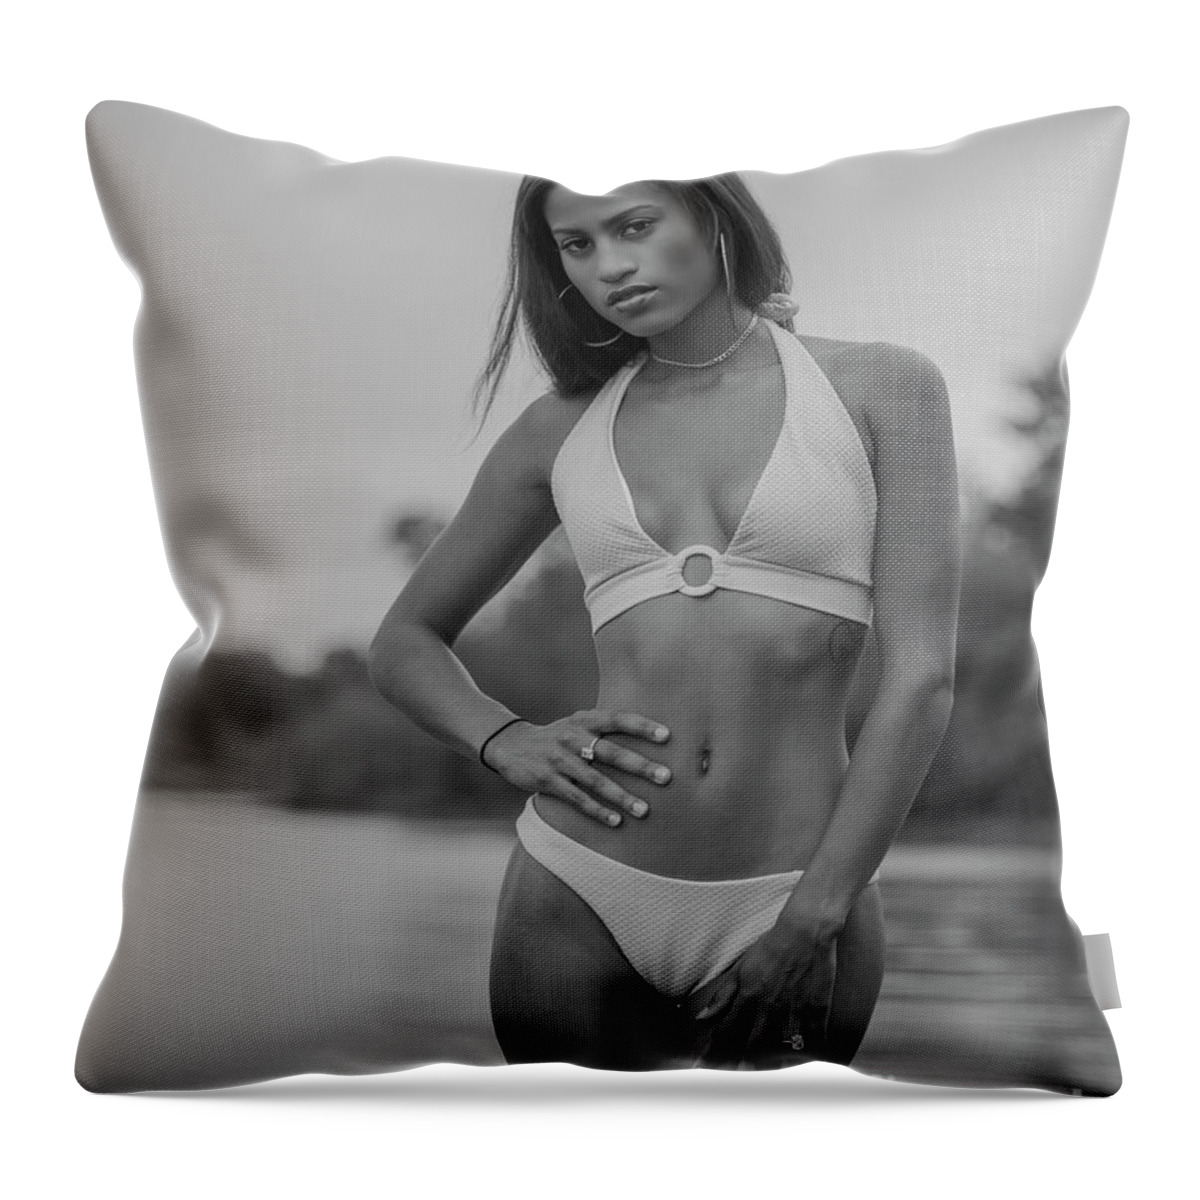 7156 Throw Pillow featuring the photograph Swimsuit by FineArtRoyal Joshua Mimbs